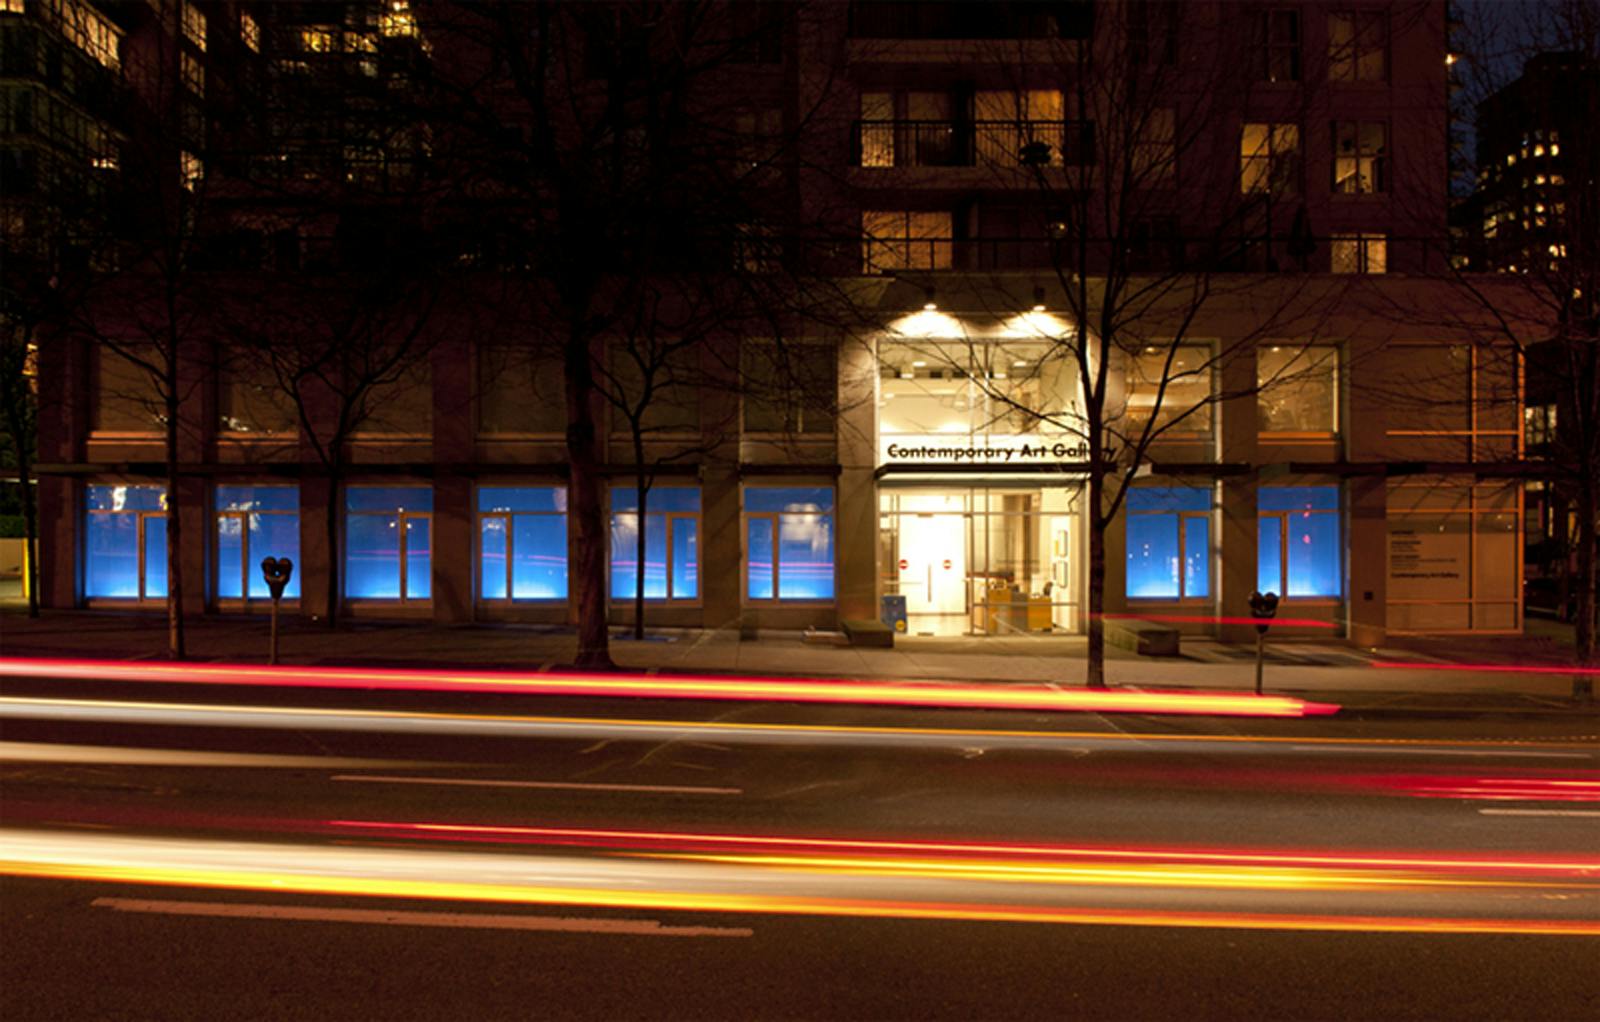 Scott Massey’s works are installed across CAG’s facade windows. These windows are blue with white light glowing at the bottom. It is nighttime, and yellow lights are glowing from the other buildings.